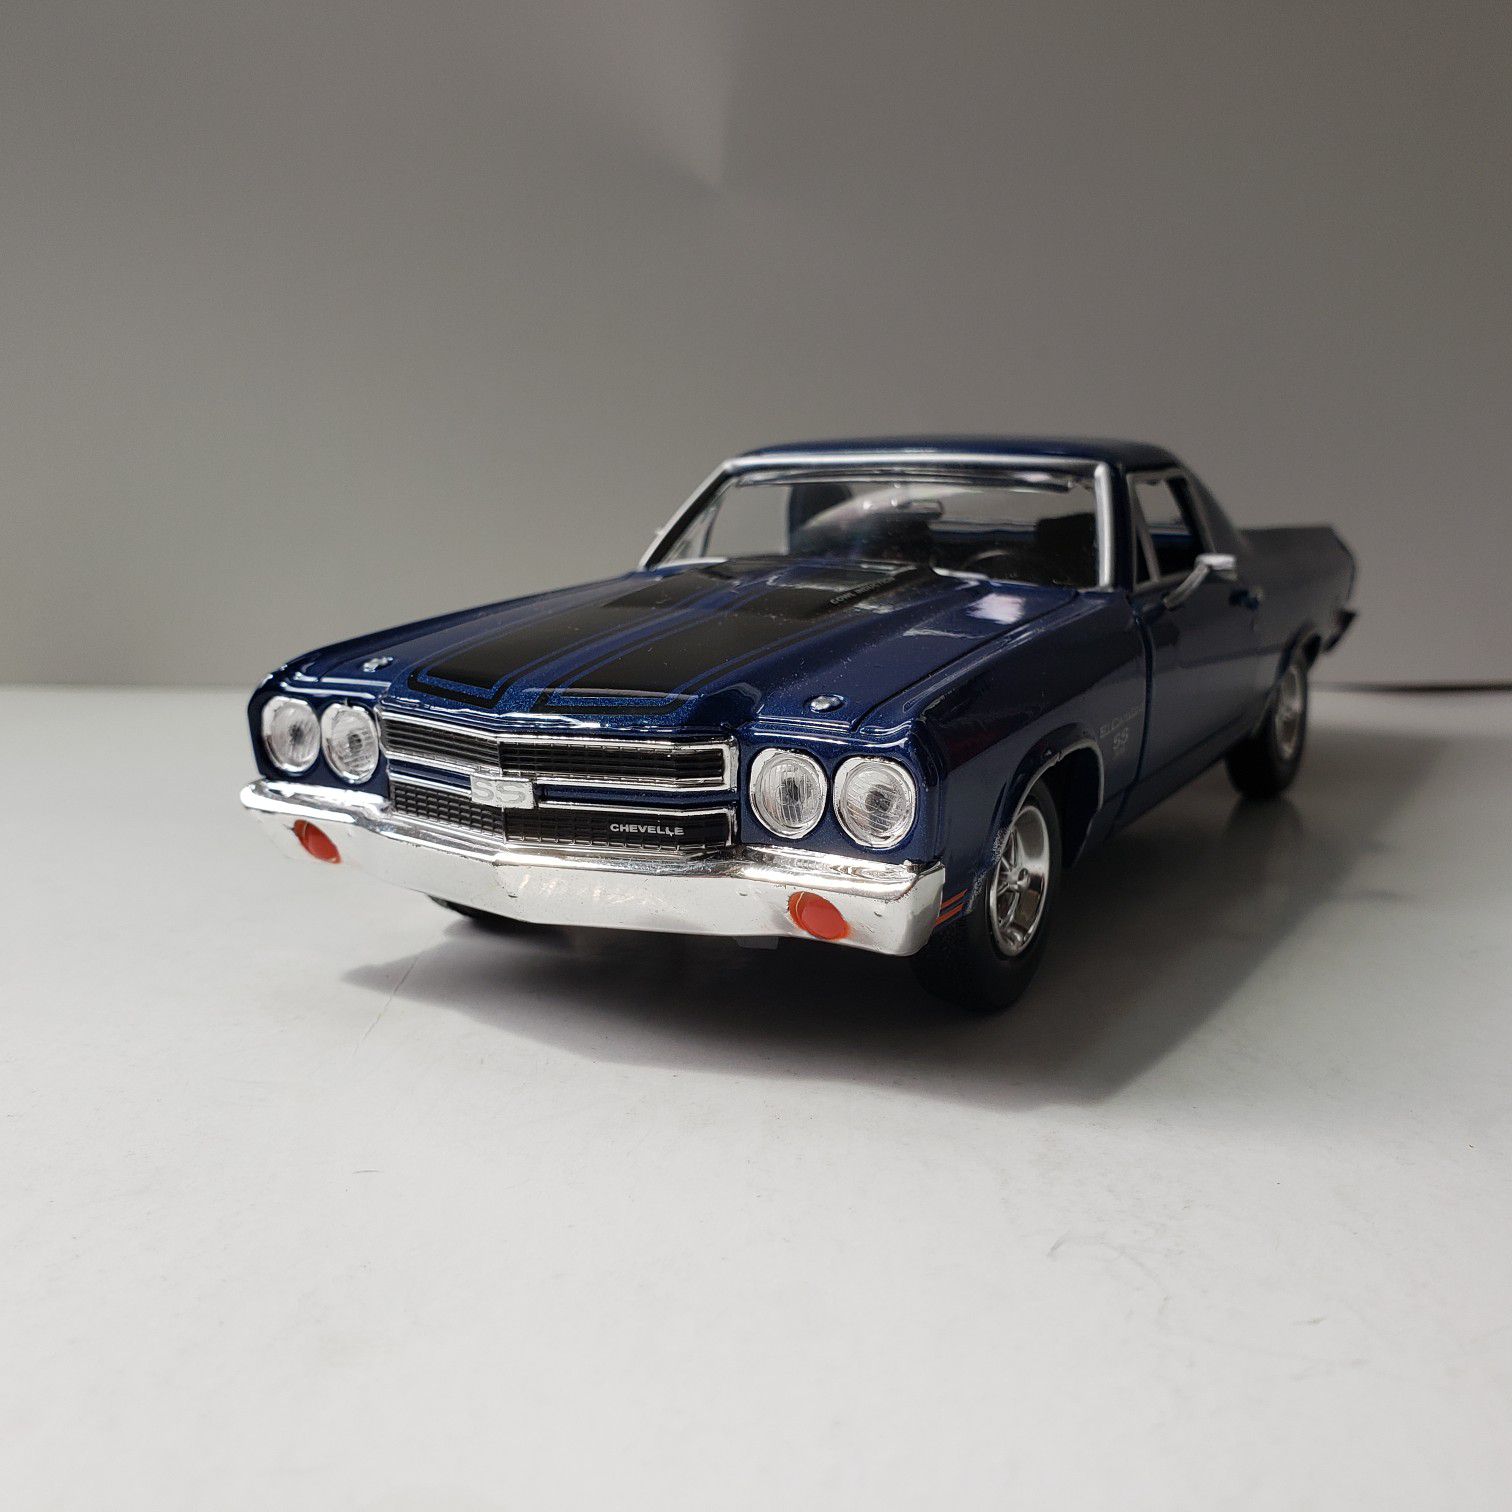 NEW Large 1970 Blue Chevy El Camino SS 396 Pickup Truck Car Toy Diecast Metal Model Scale 1/24 1:24 124 Vintage 1970s Chevrolet Classic